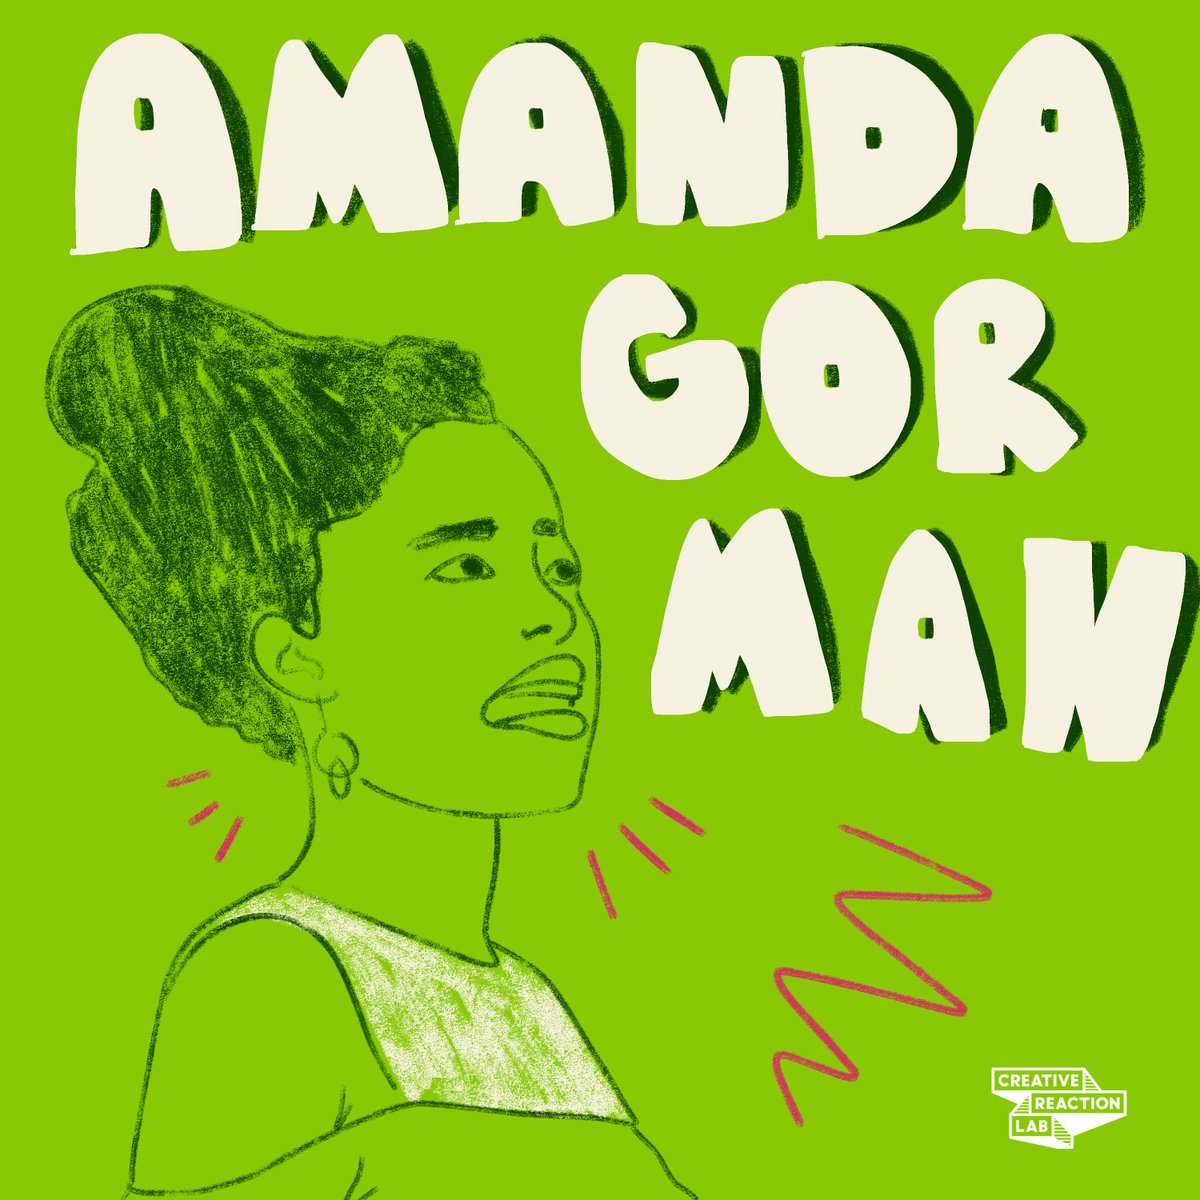 #BlackHistoryMonth Amanda Gorman, the youngest inaugural U.S. poet, has garnered acclaim as an award-winning writer. Her literary prowess extends to contributions for the New York Times, with three upcoming books to be published by Penguin Random House. theamandagorman.com